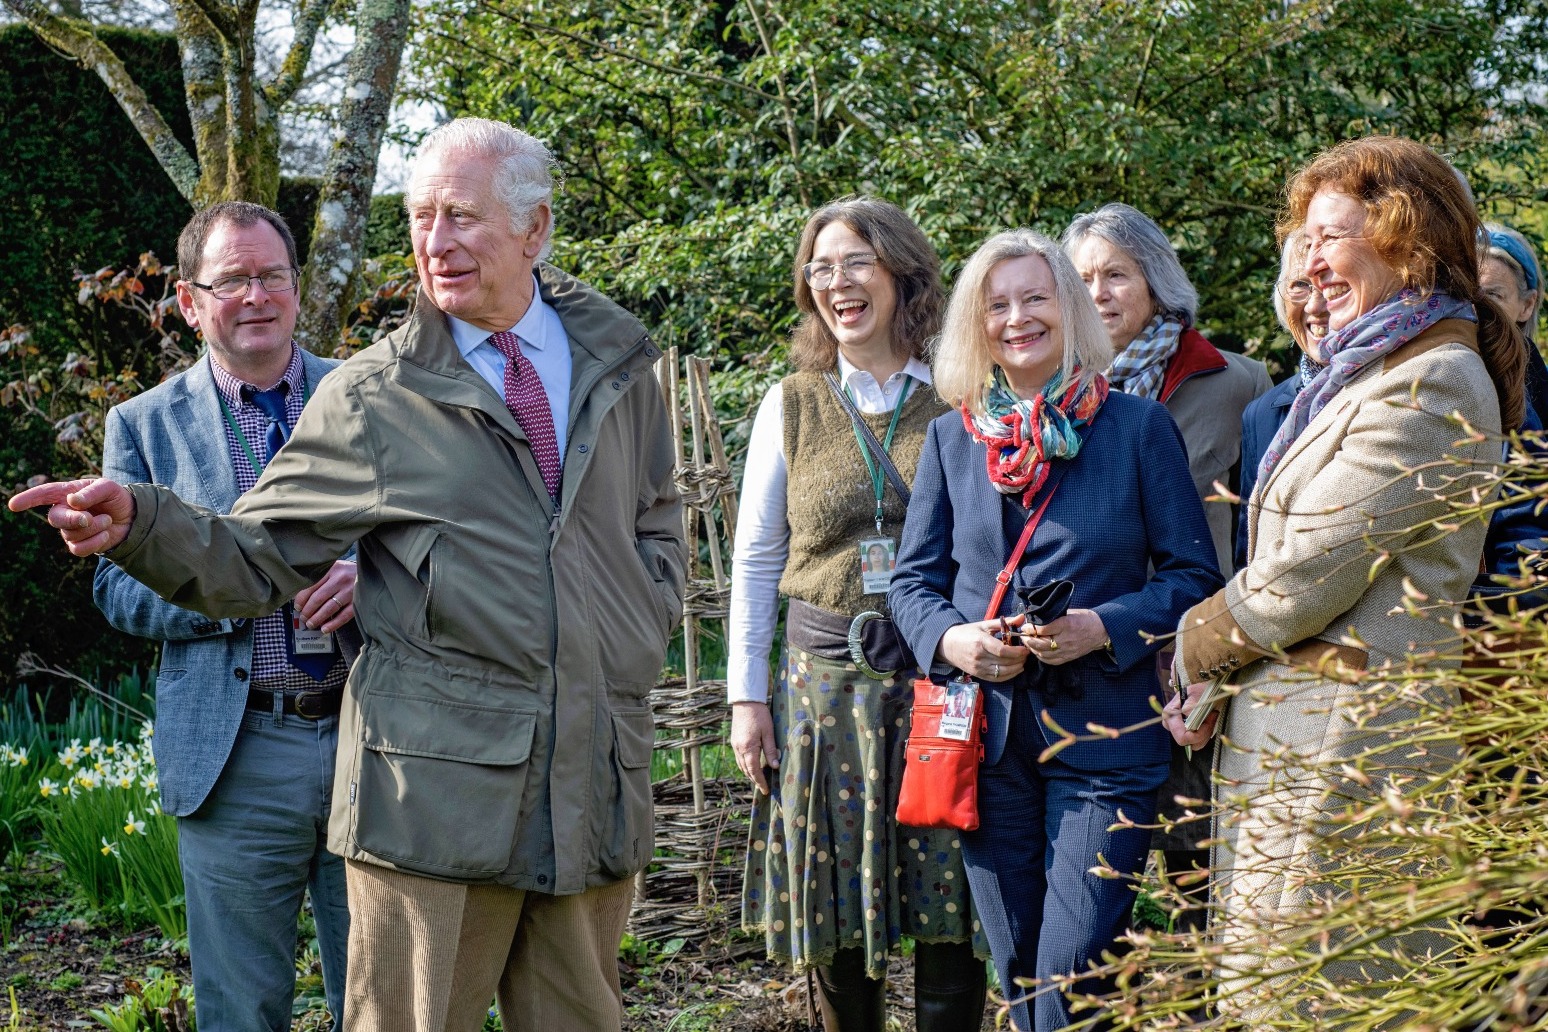 Prince of Wales welcomes tour guides to garden estate ahead of spring opening 